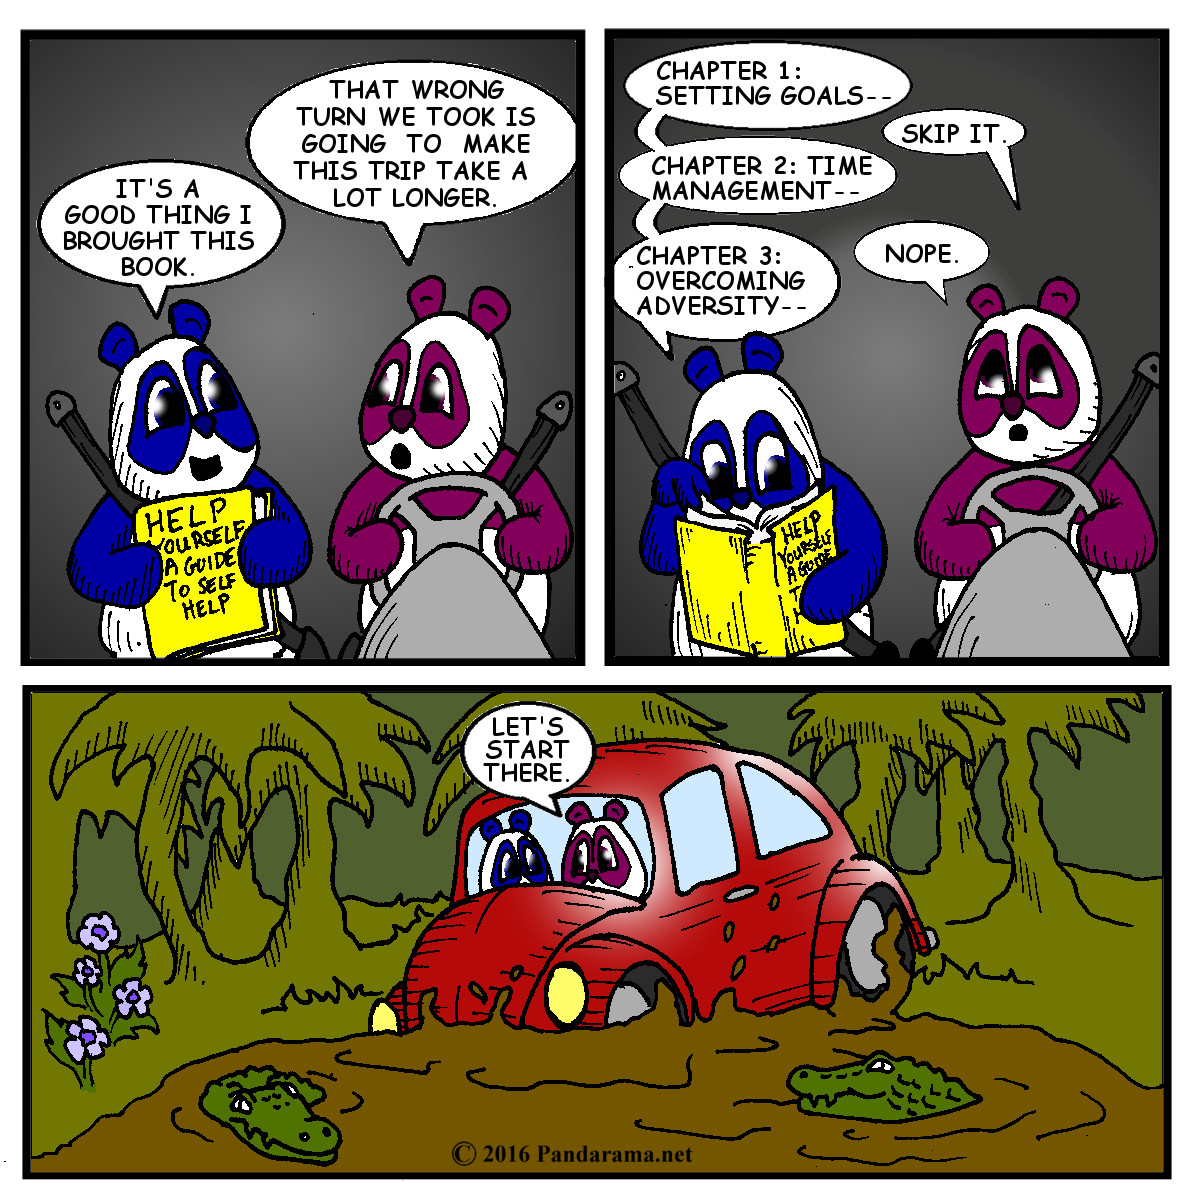 Panda bears skip to chapter on overcoming adversity in a self help book to get them out of a swamp during a roadtrip. self-help cartoon. overcoming adversity cartoon. roadtrip cartoon.